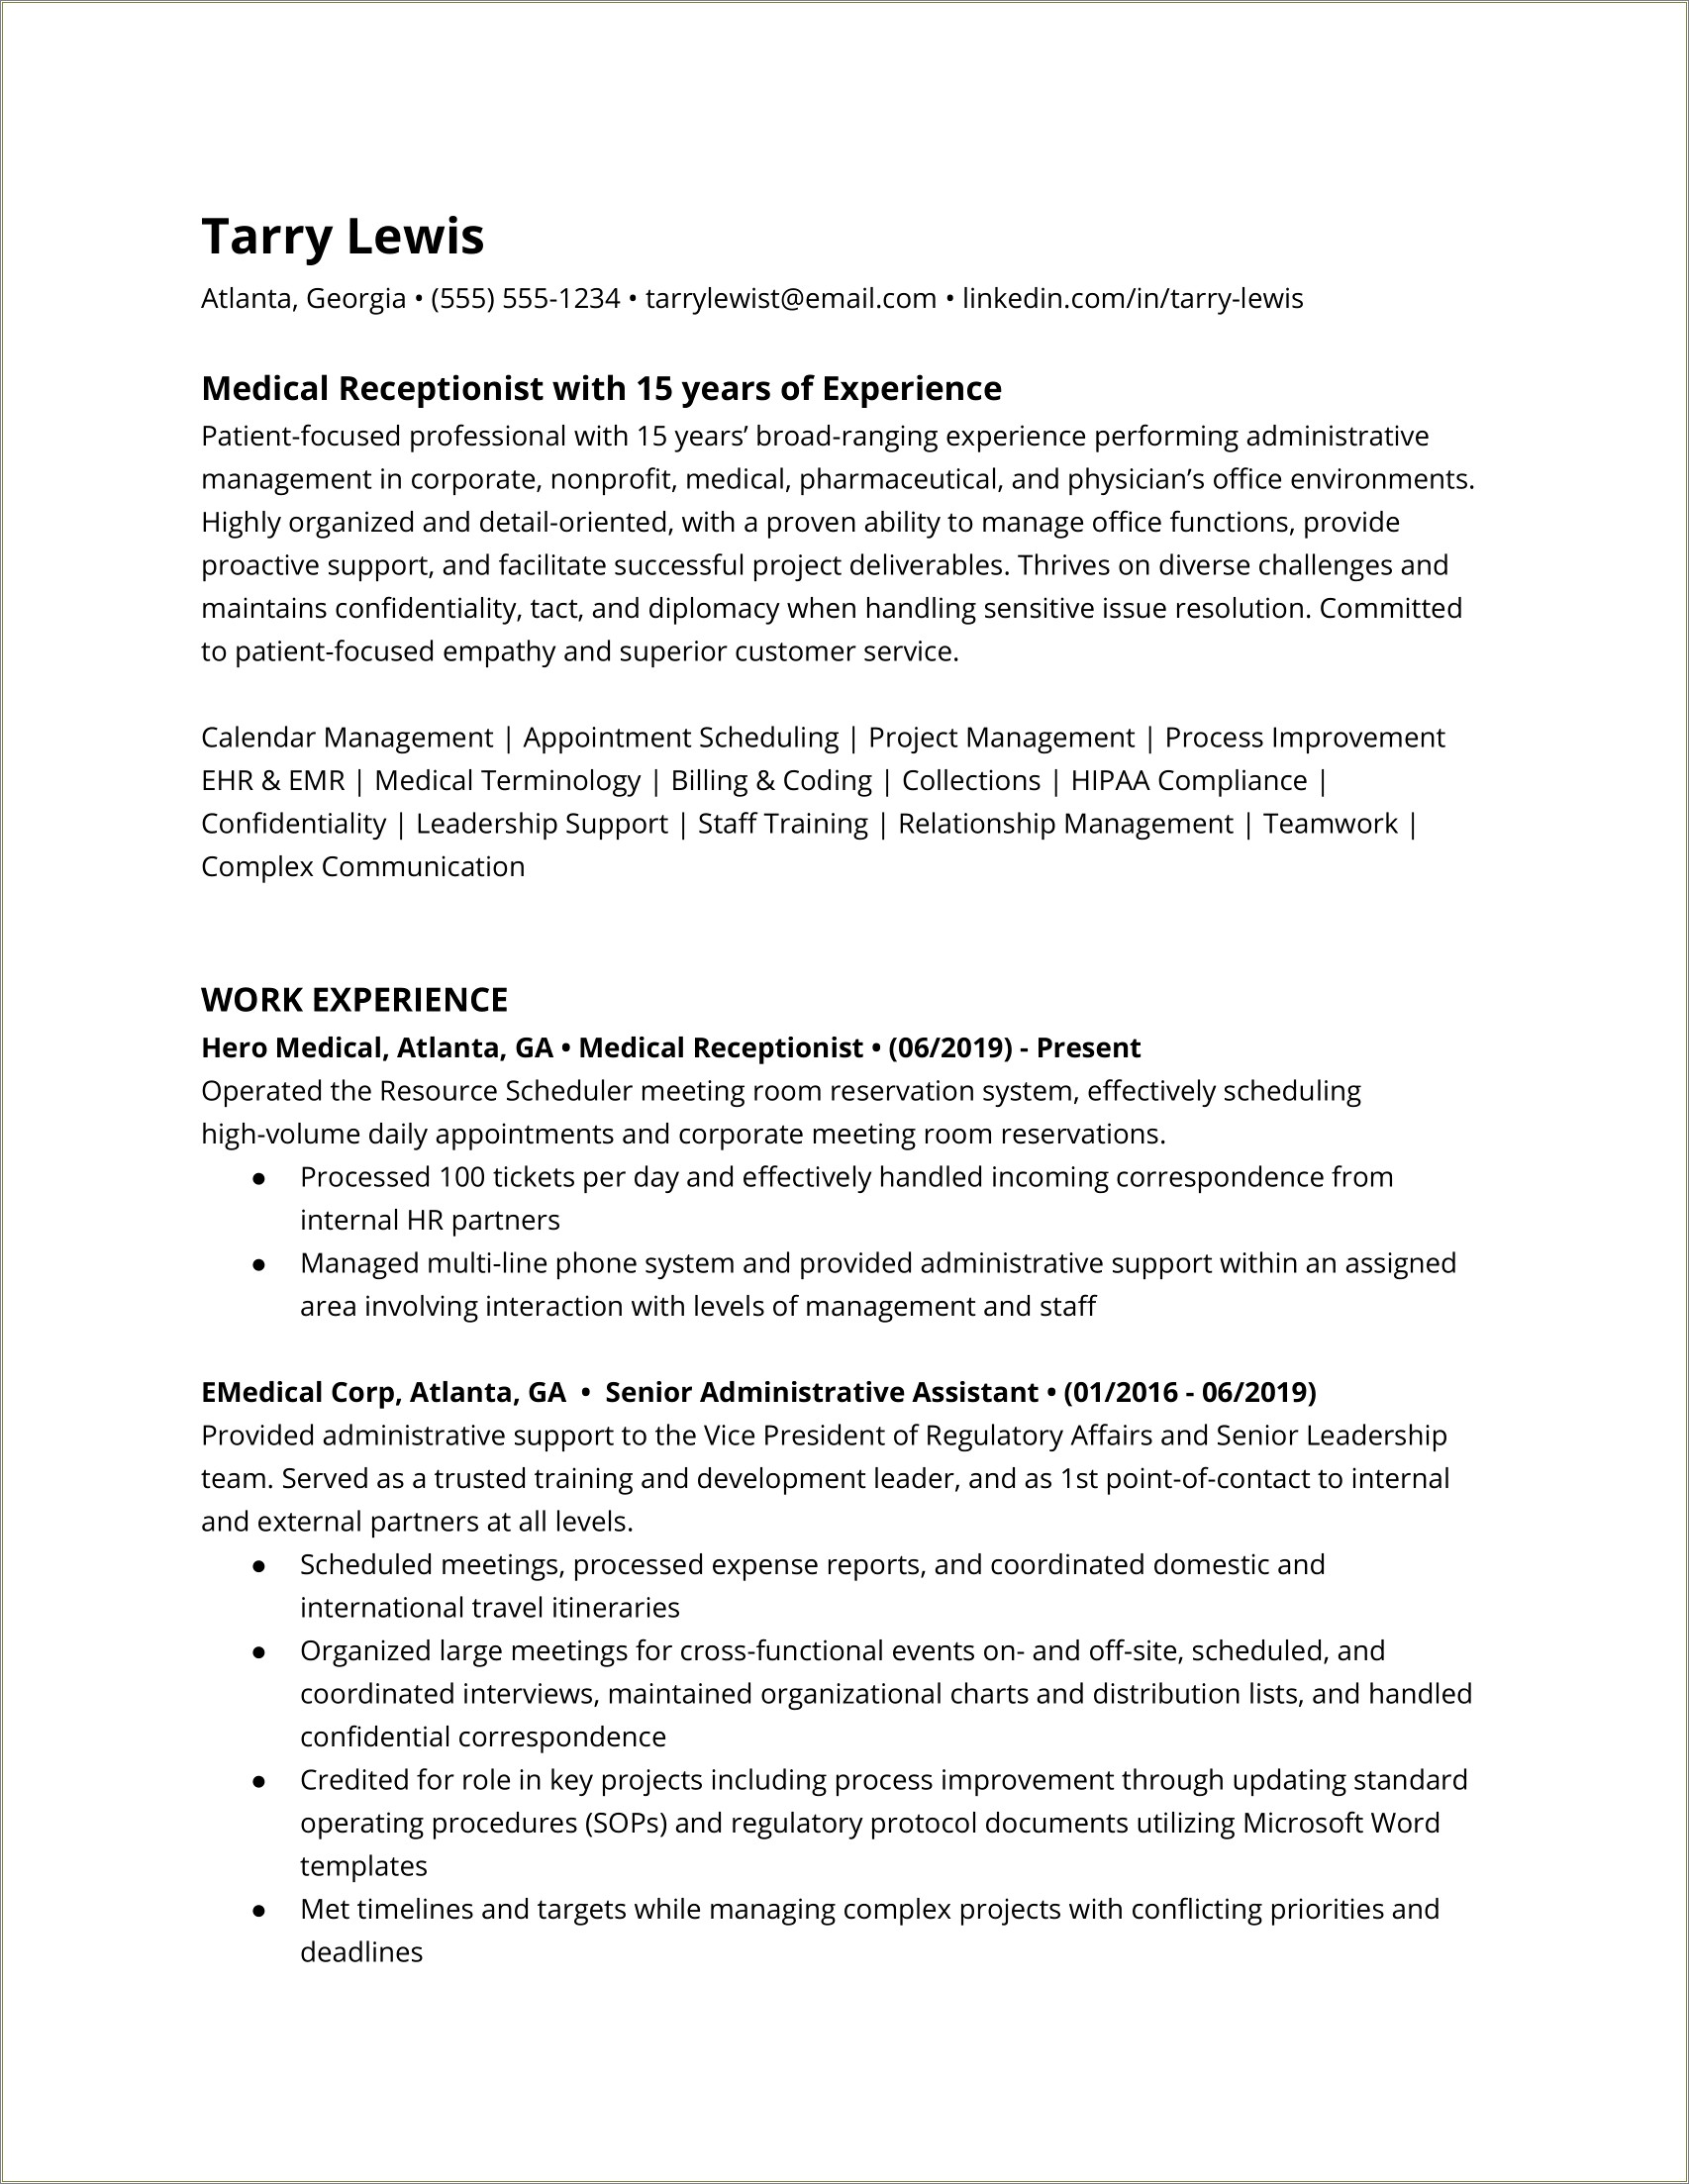 Resume Improve Communication With Staff Example